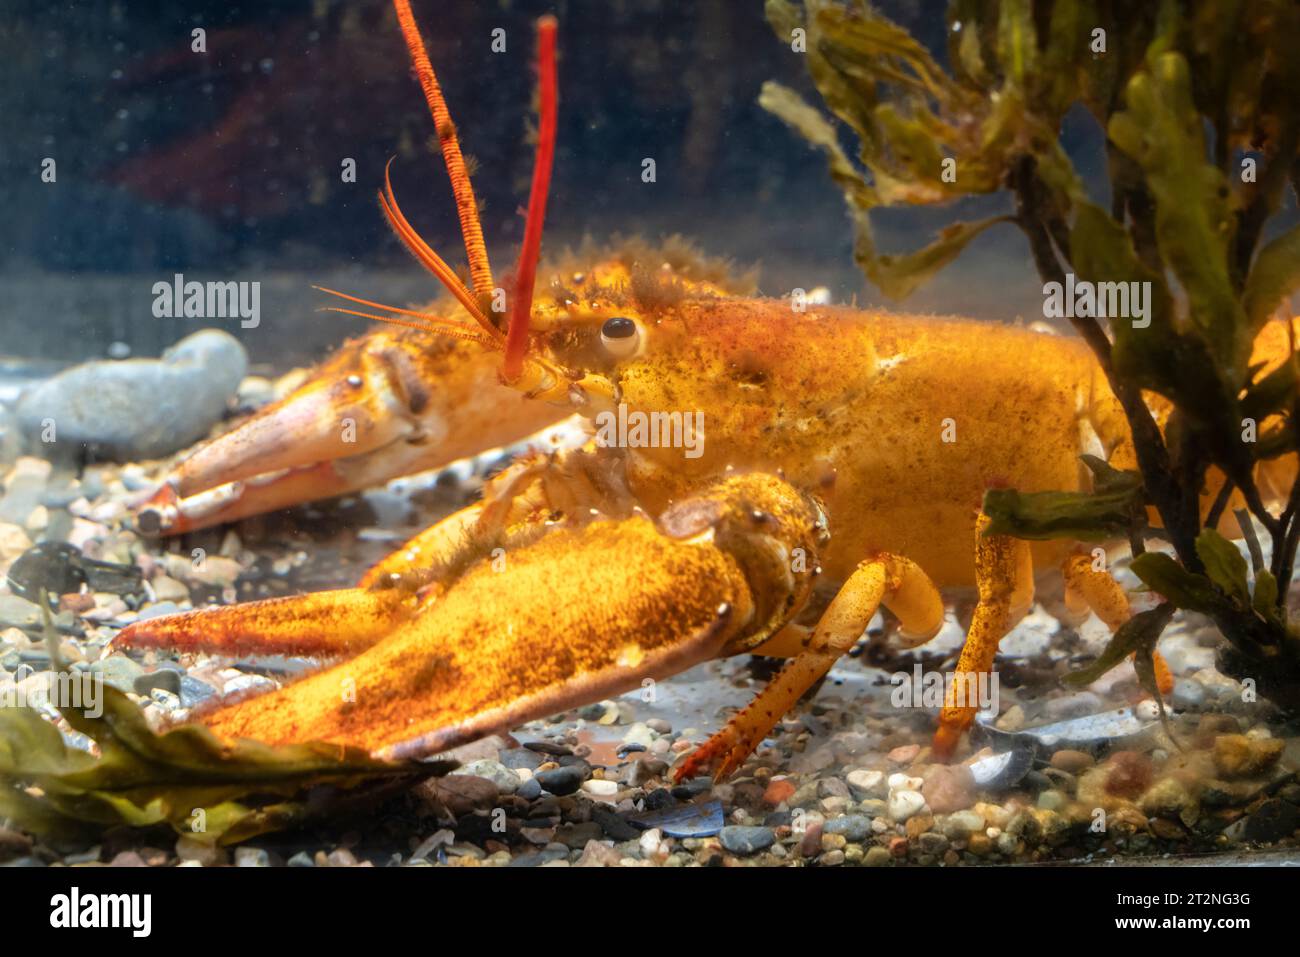 Rare (1 in 10M) red lobster at Bonne Bay Marine Research Station, Newfoundland. Stock Photo